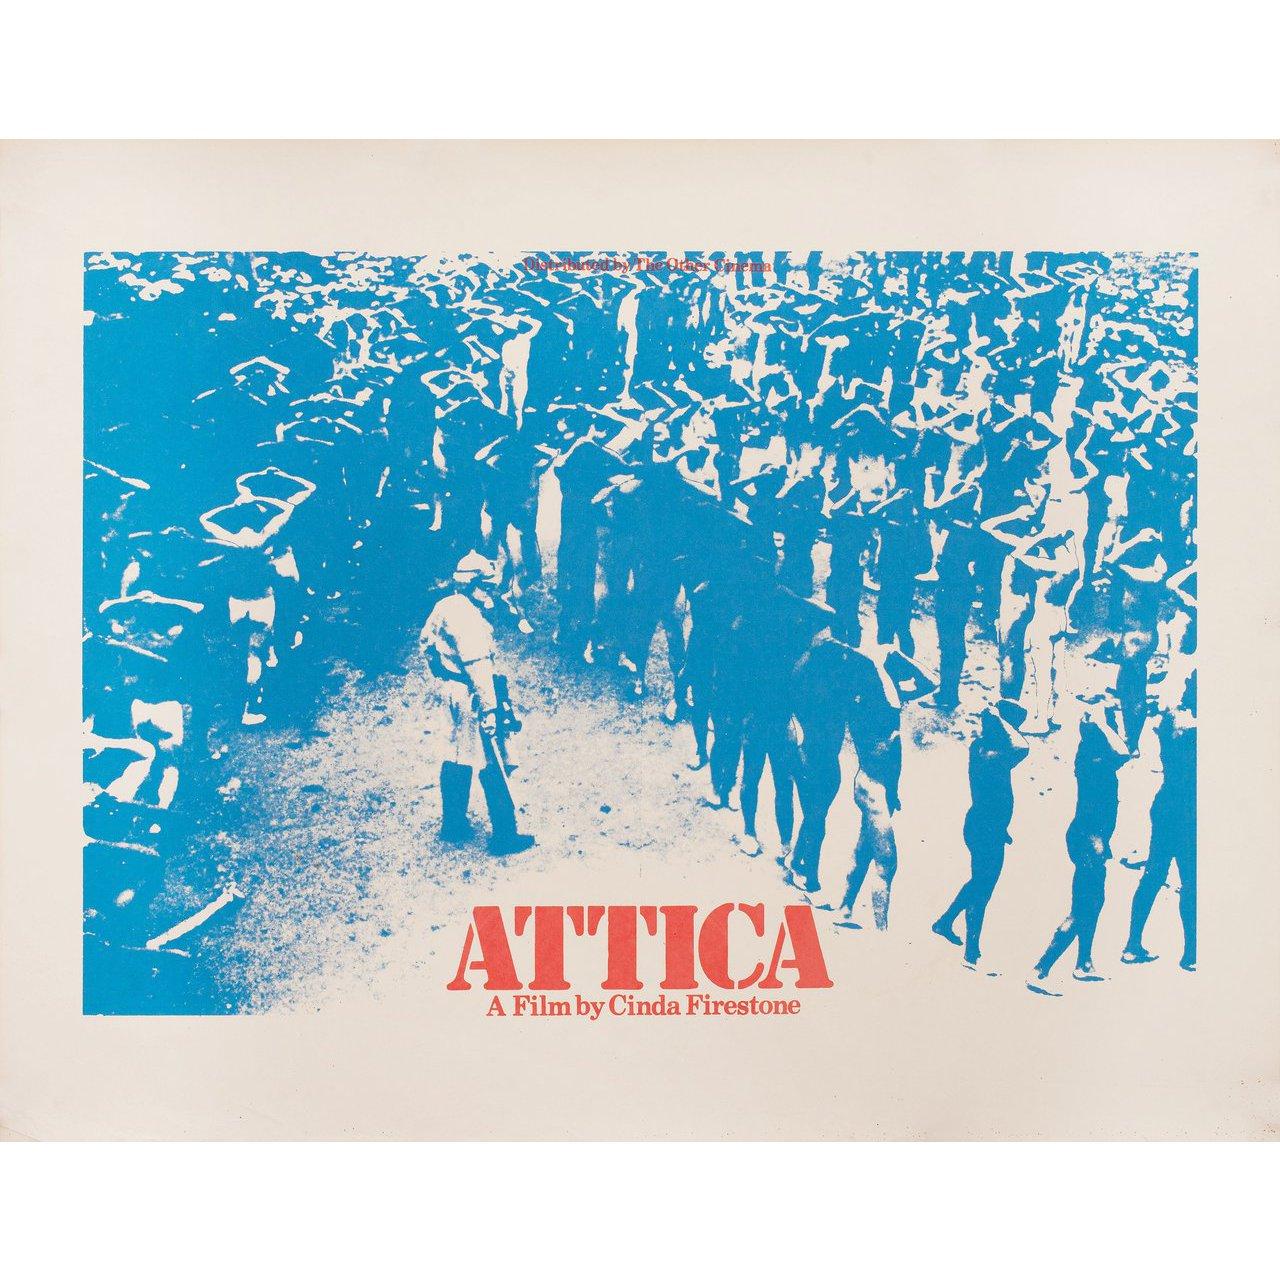 Original 1974 British double crown poster for the documentary film ‘Attica’ directed by Cinda Firestone. Very good-fine condition, rolled. Please note: the size is stated in inches and the actual size can vary by an inch or more.
  